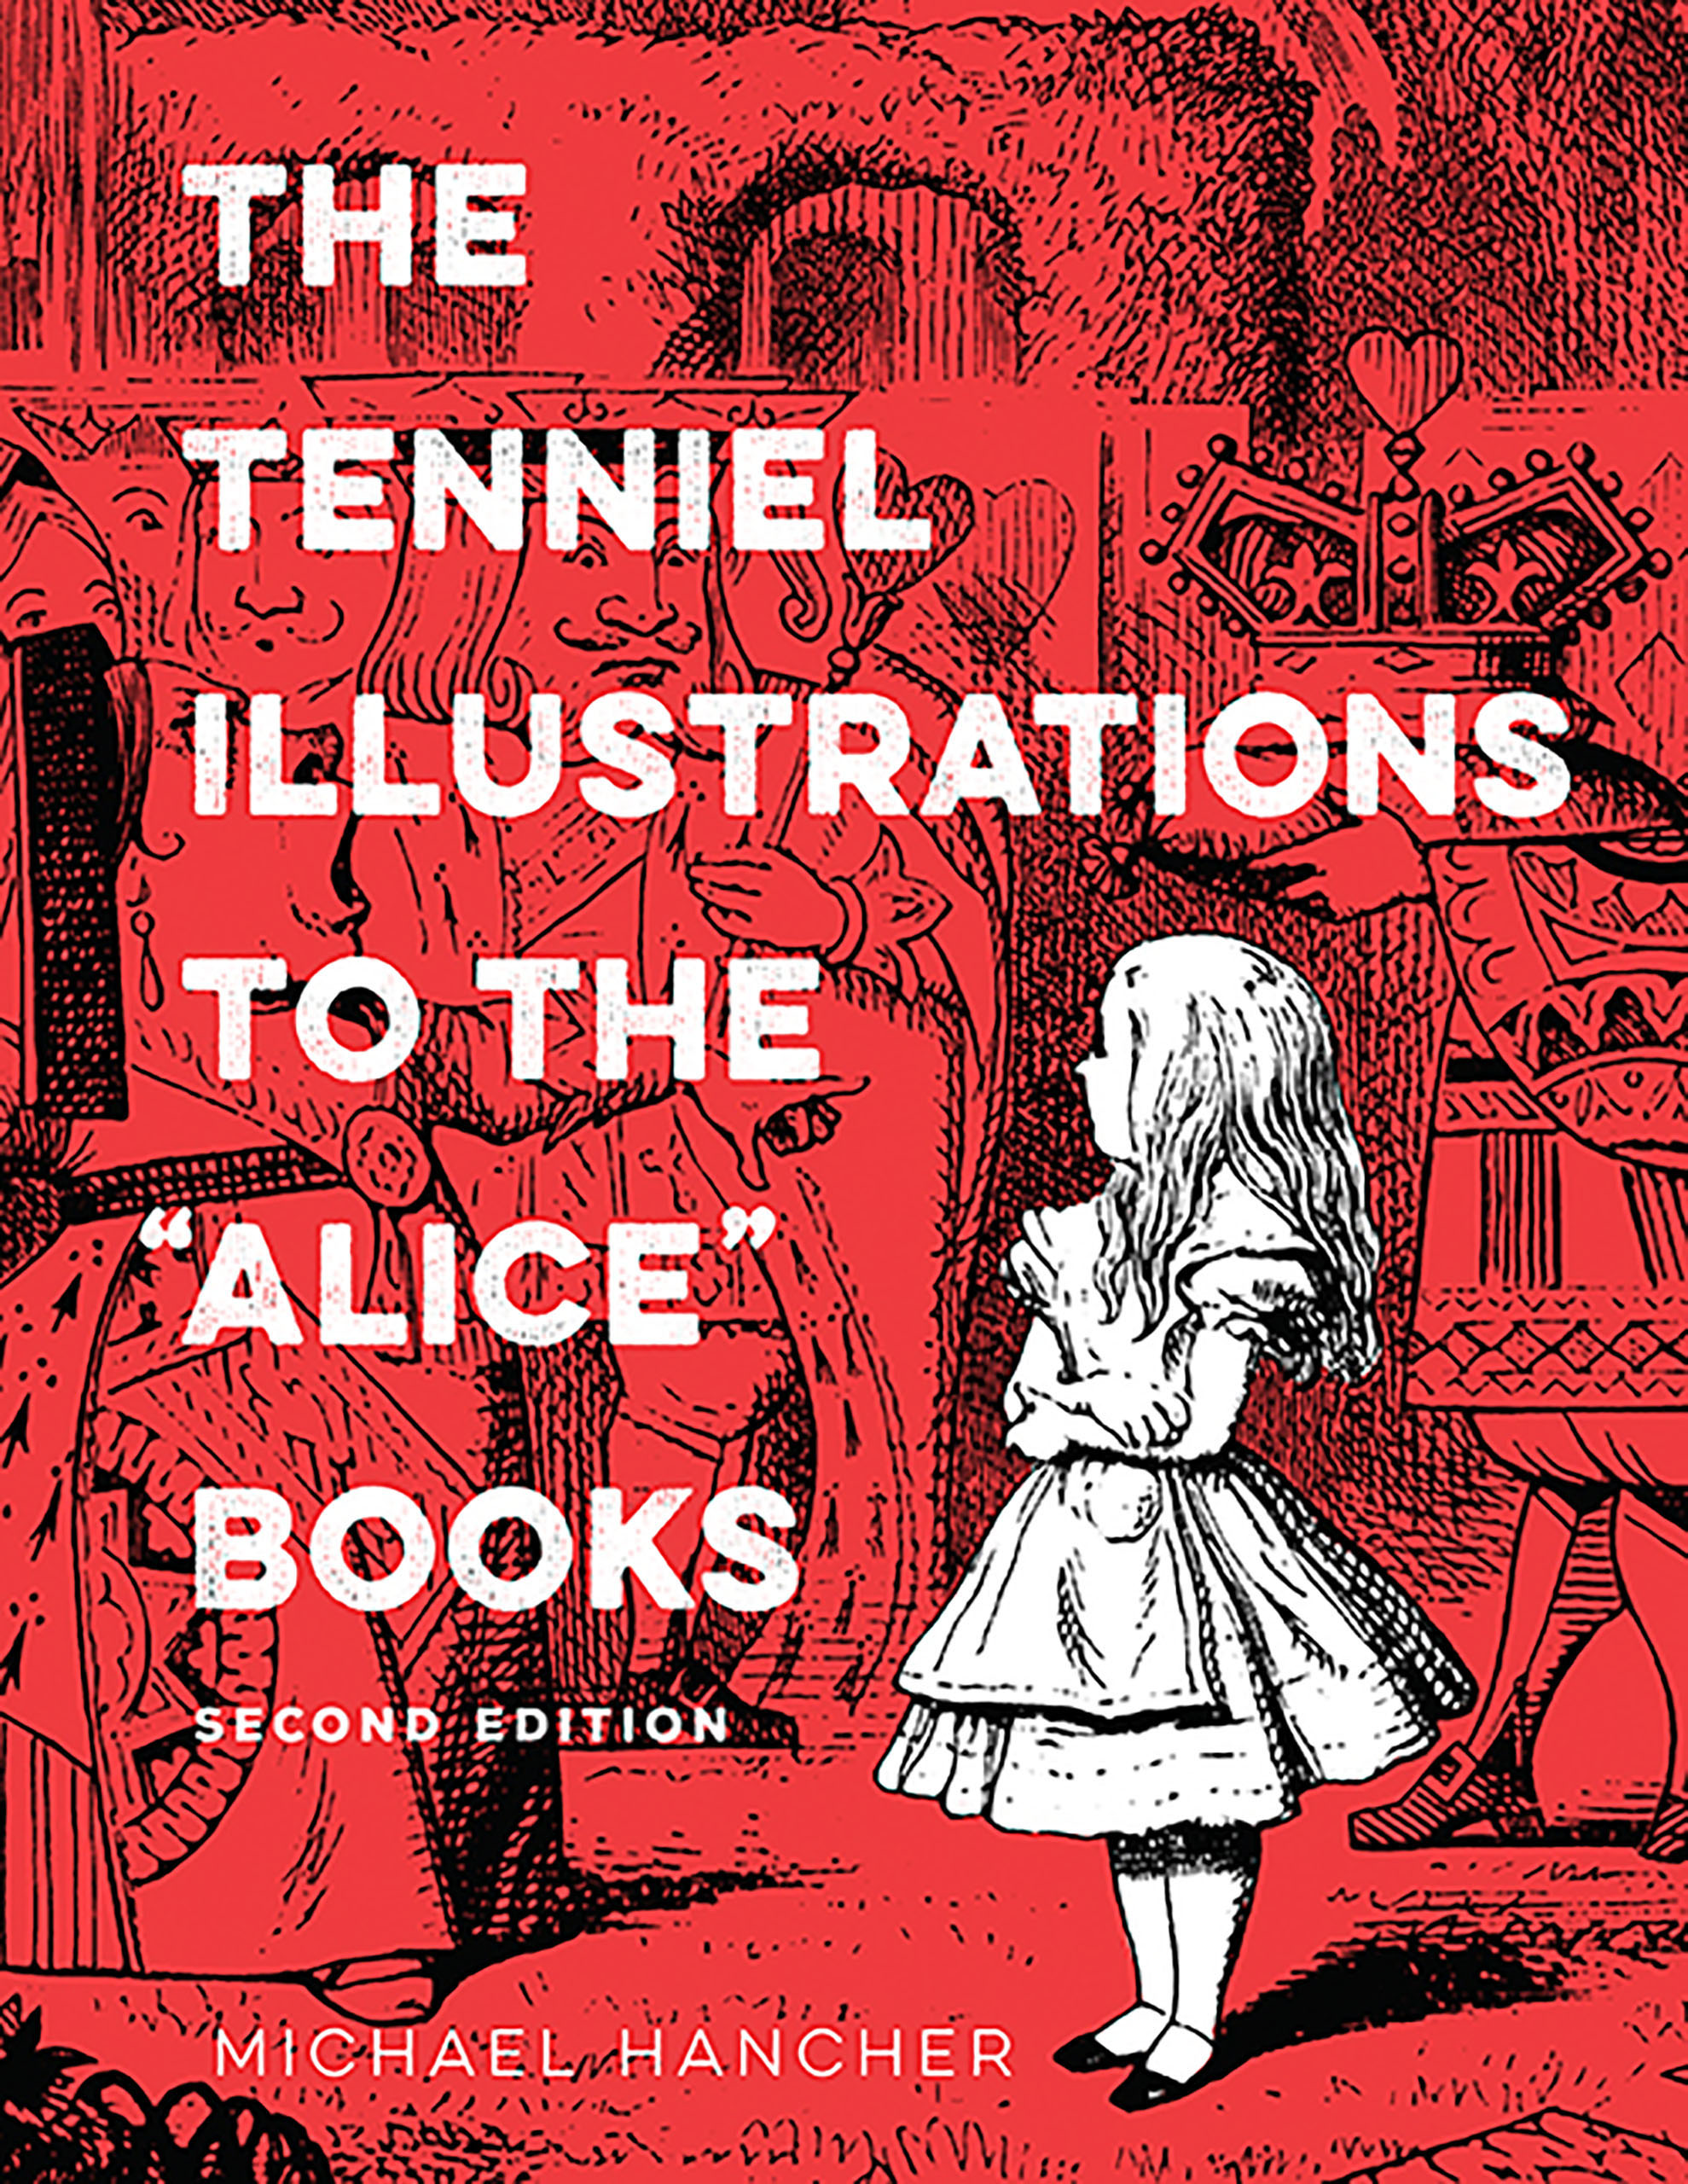 The Tenniel Illustrations to the Alice Books, 2nd edition